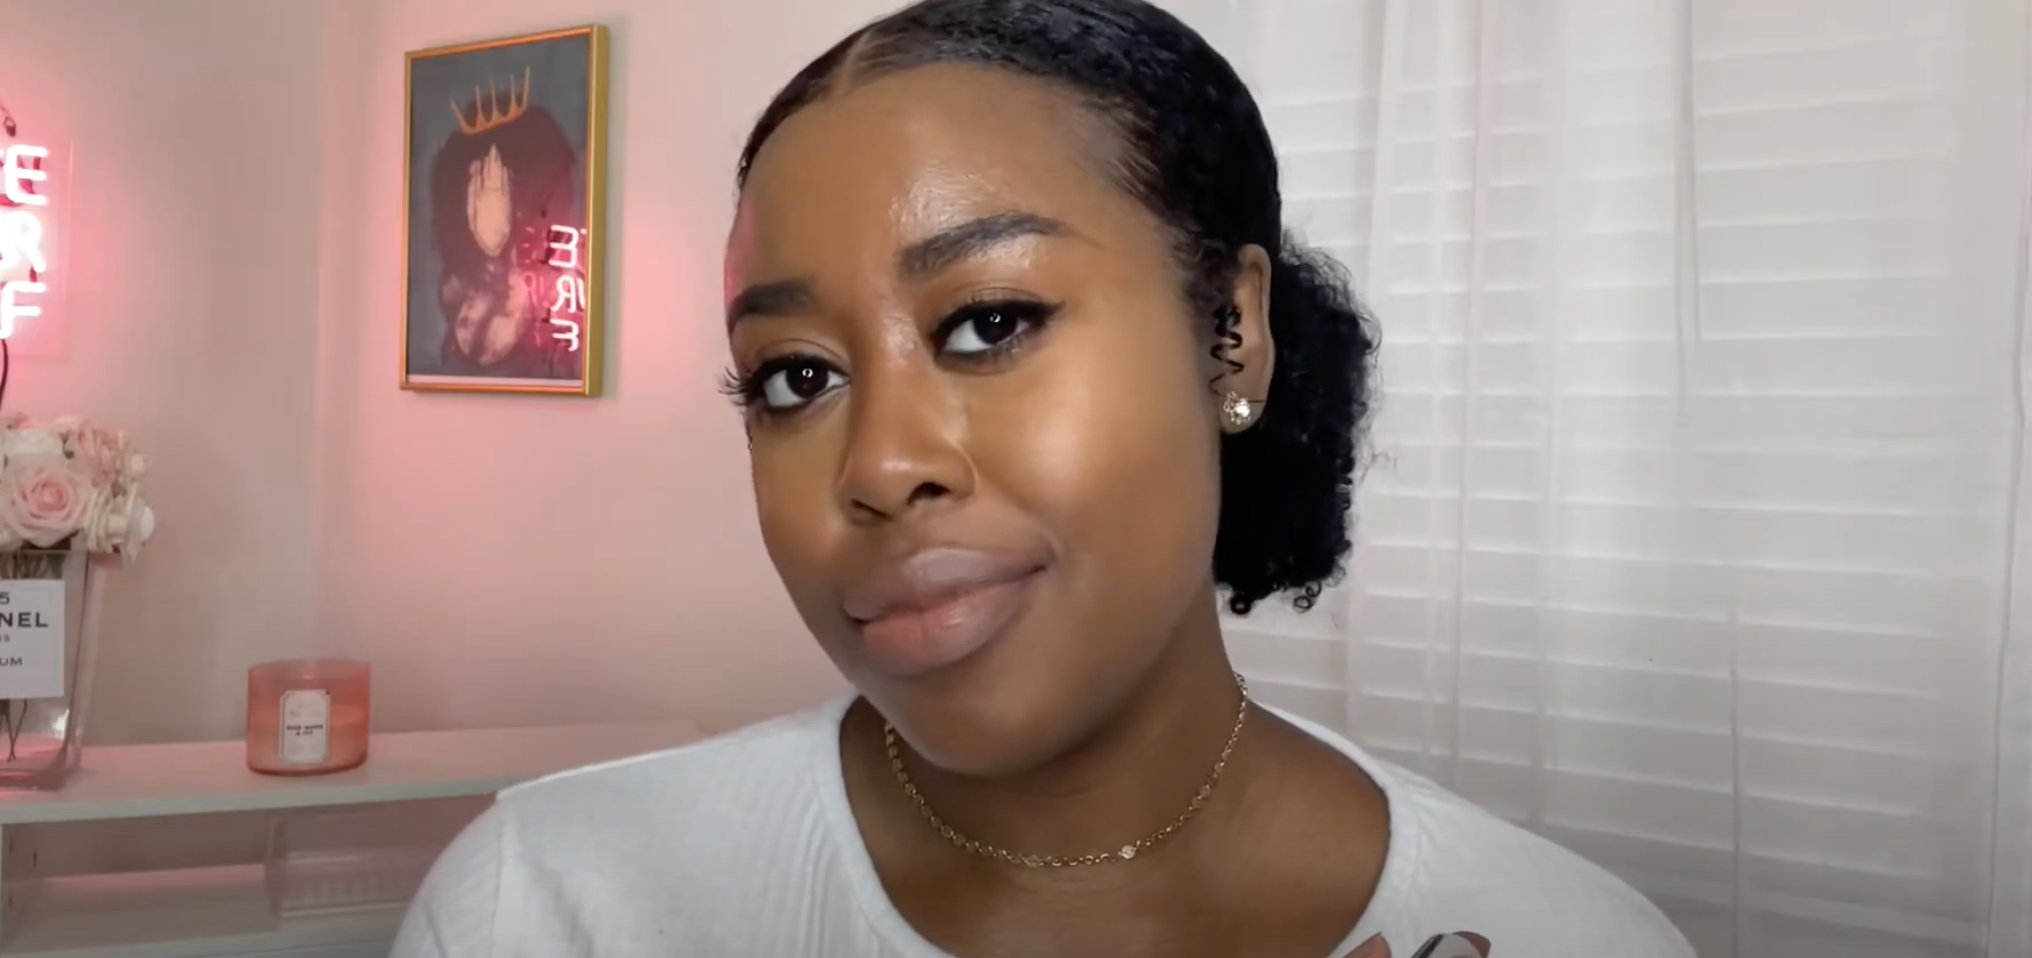 Carlyn Tucker Tries Out Five Shades of Mented Cosmetics Lipsticks